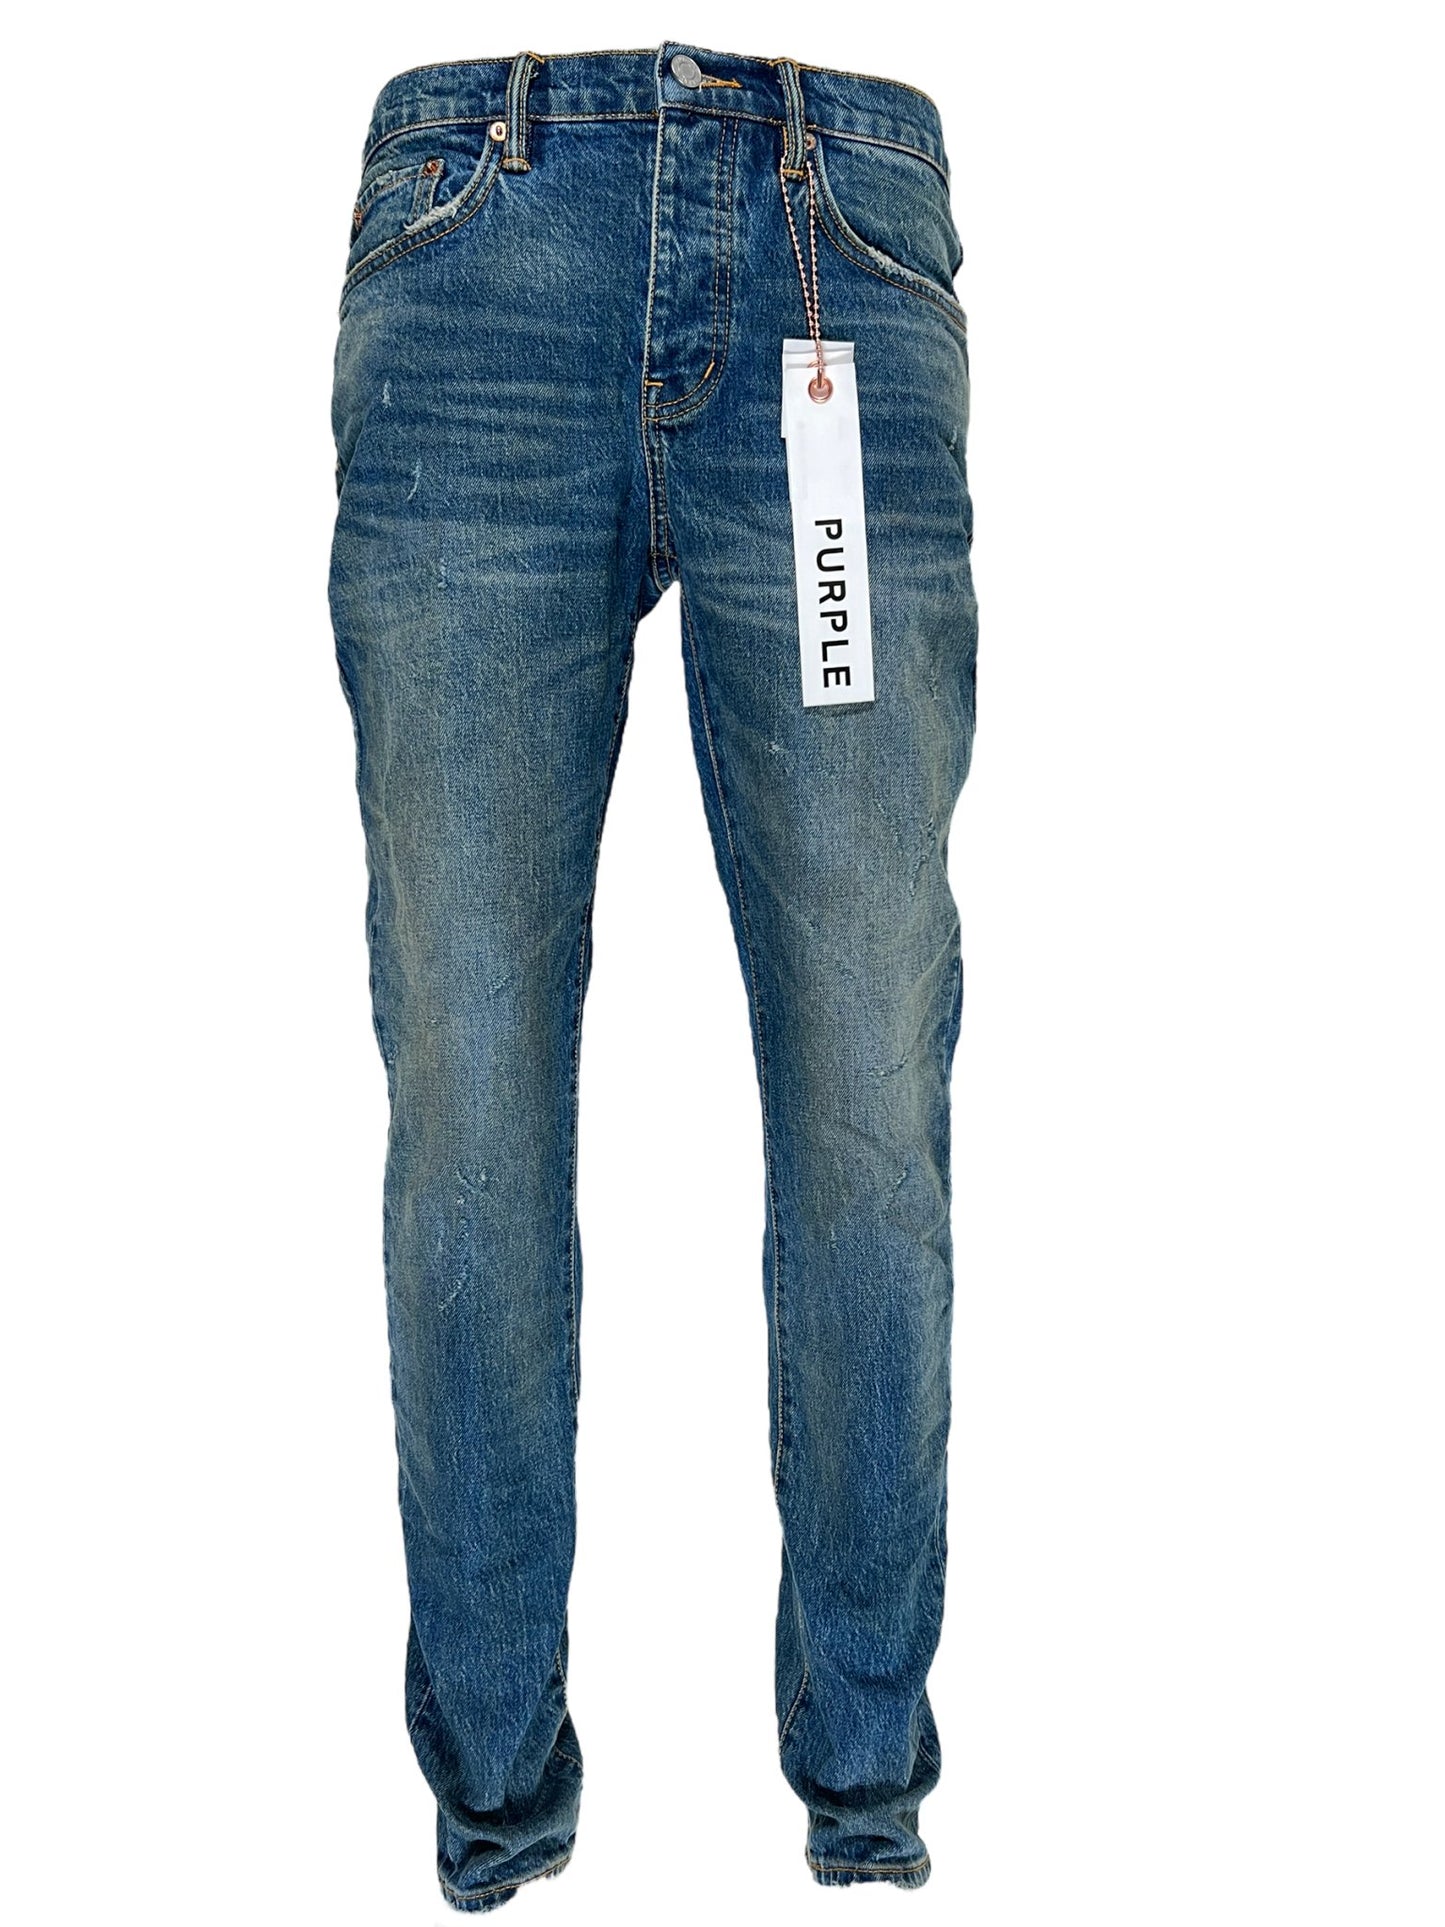 Sentence with the replaced product:

A pair of Purple Brand P001-DPMI Dirty Patina DK Indigo jeans with a tag on them.